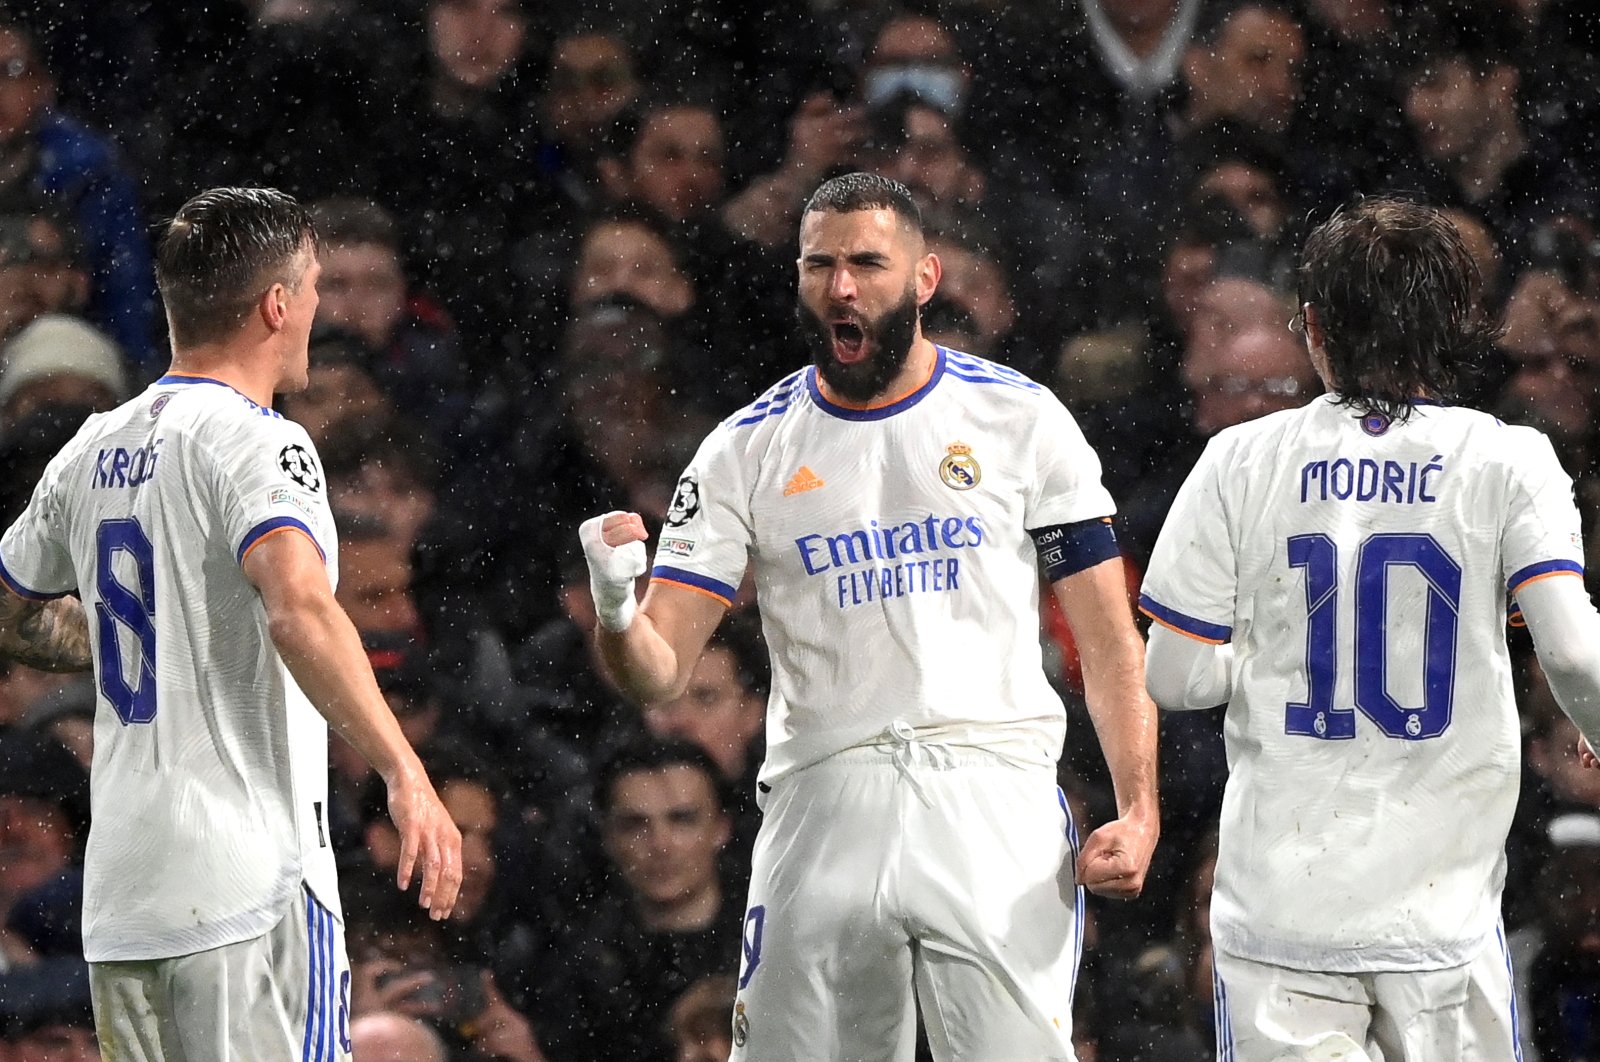 Real Madrid&#039;s Karim Benzema (C) celebrates with teammates during the Champions League quarterfinal match against Chelsea, London, April 6, 2022. (EPA Photo)